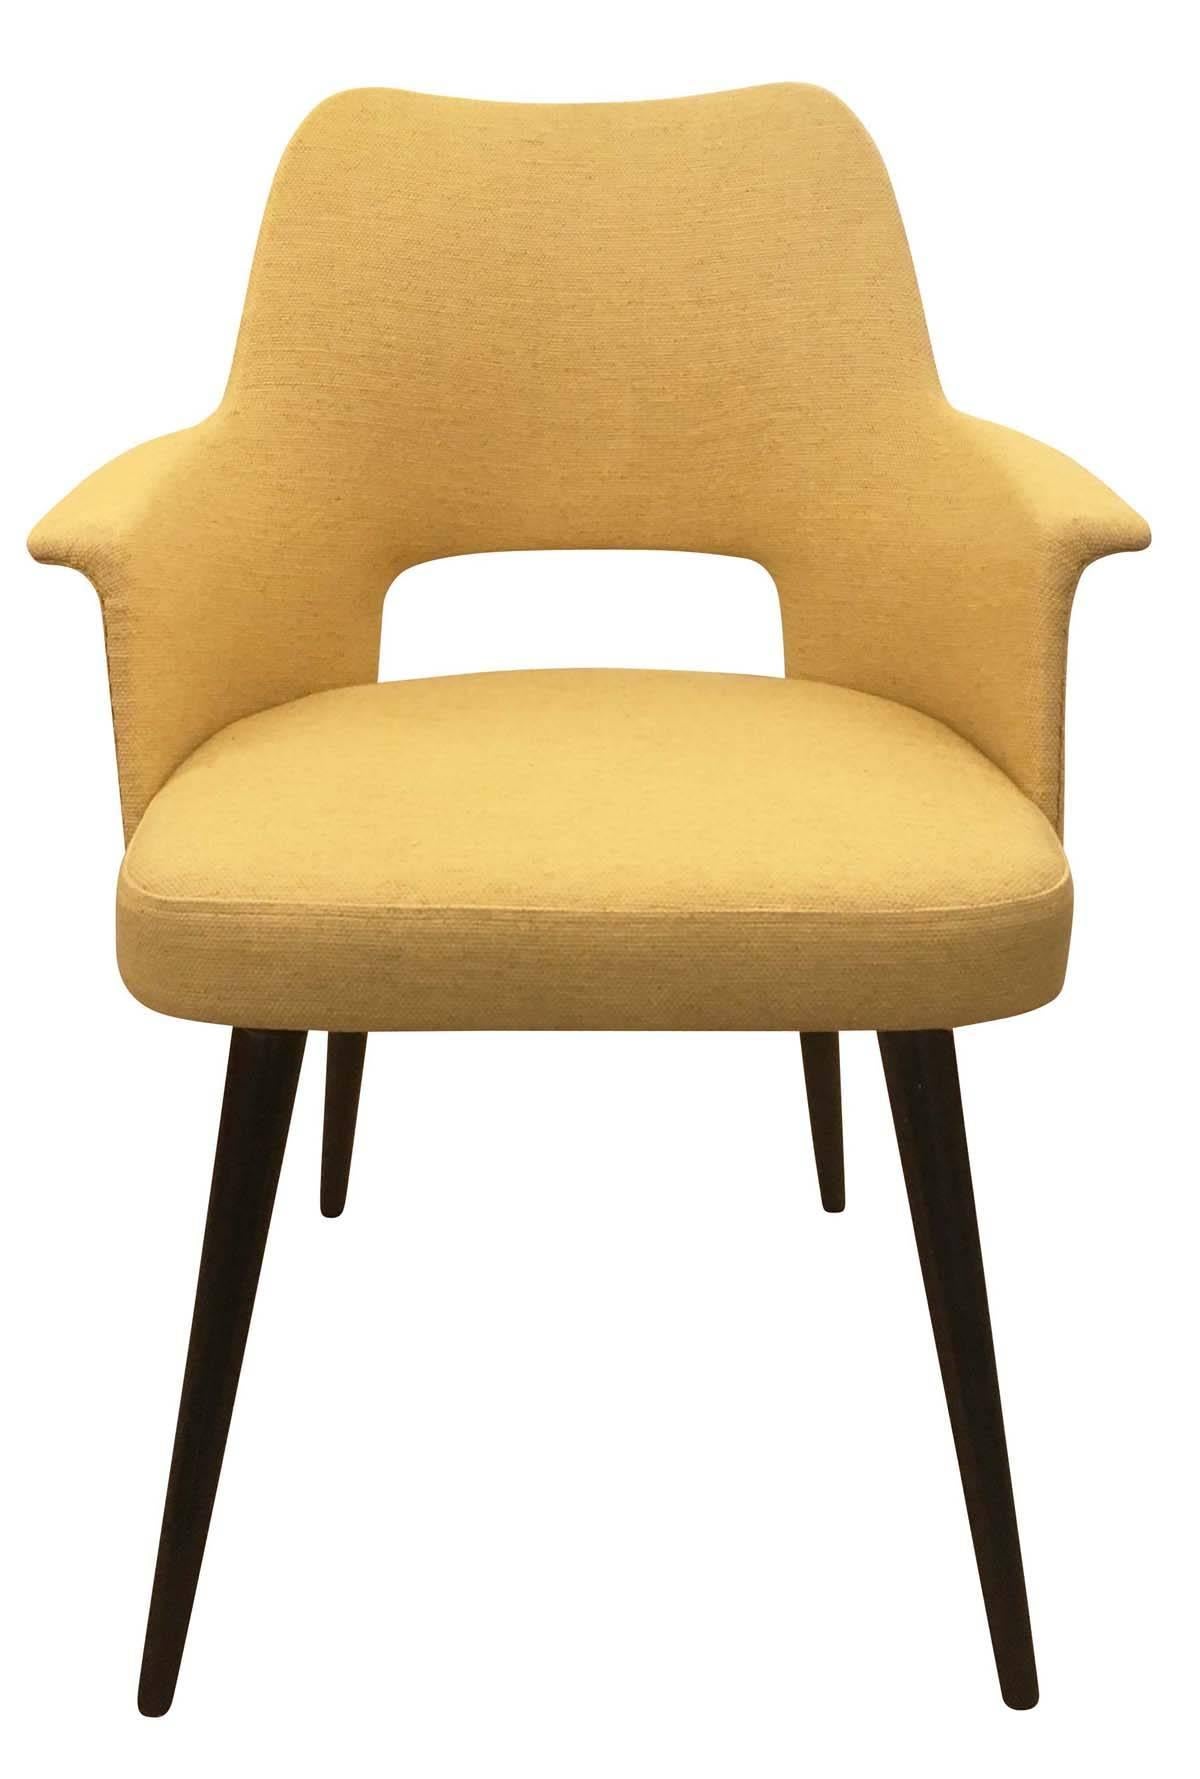 Pair of Mid-Century Chairs in the Style of Borsani 1